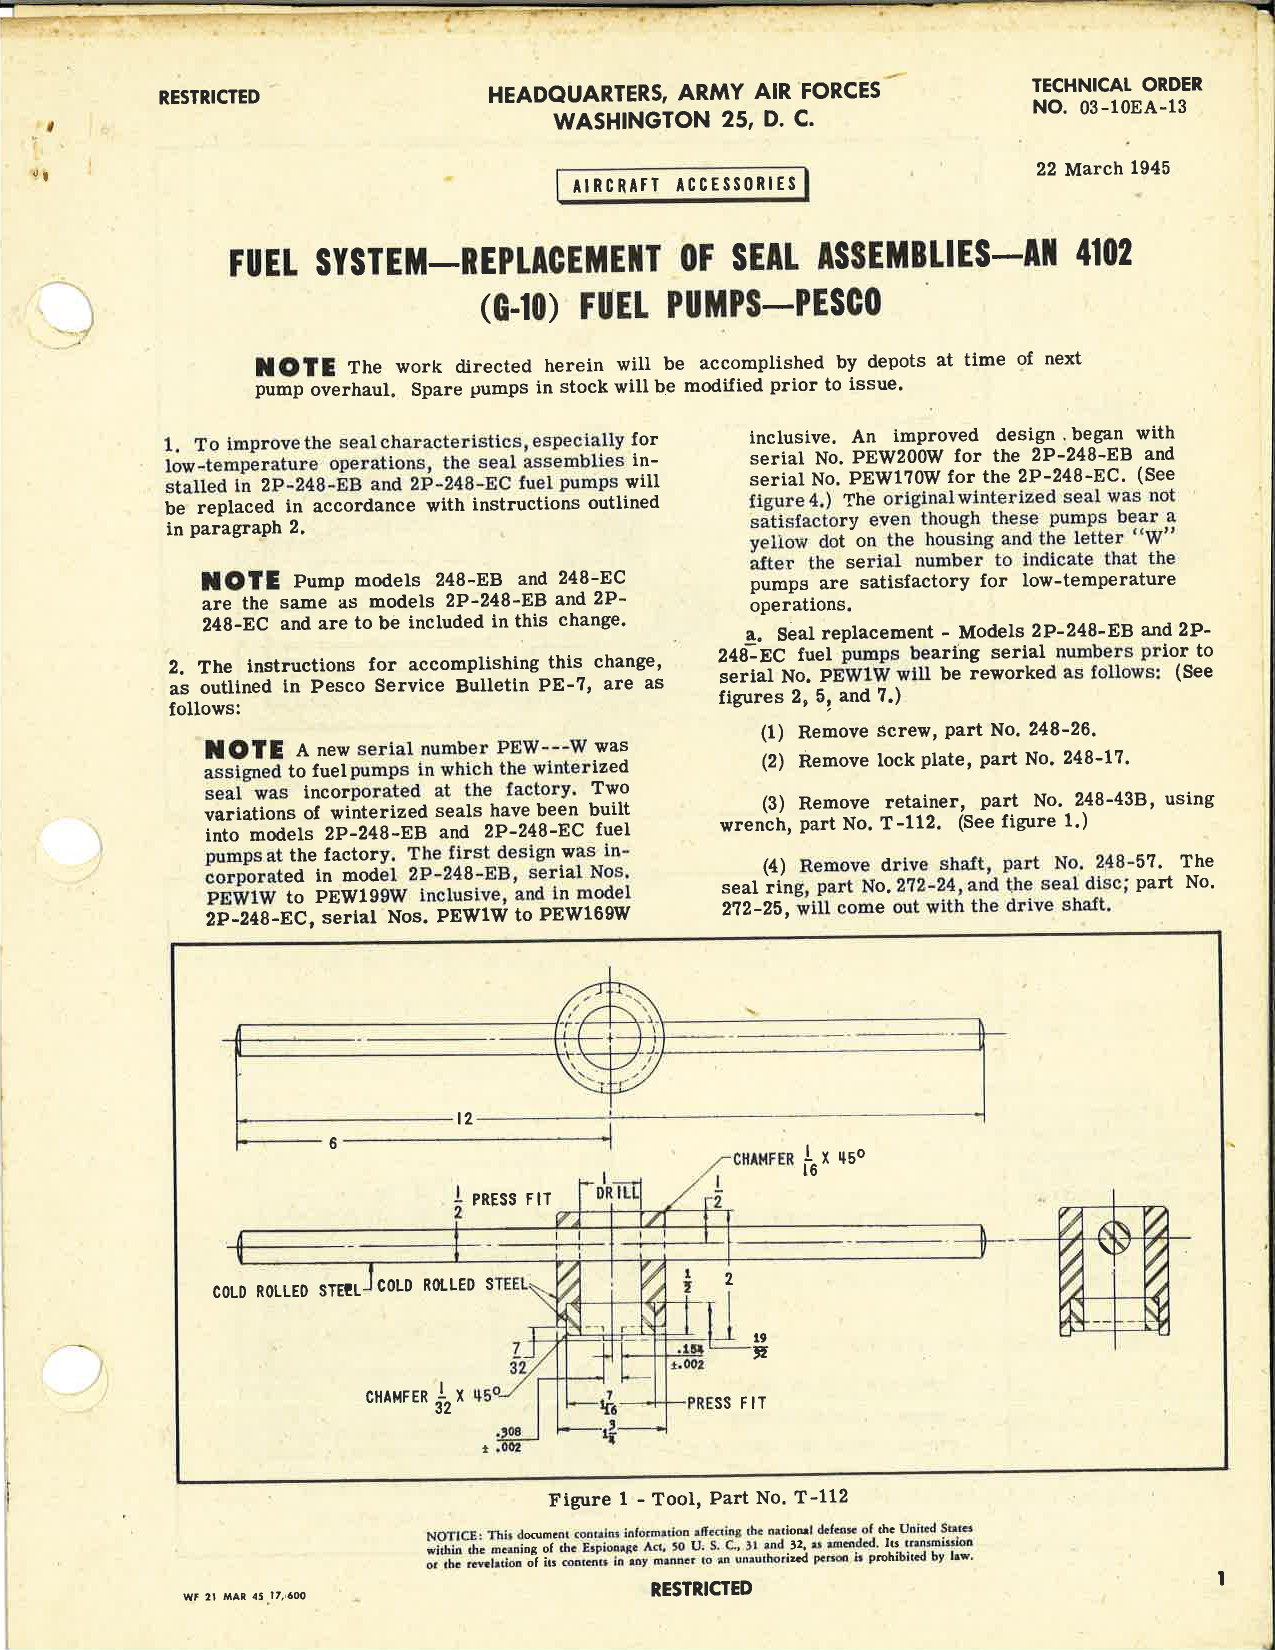 Sample page 1 from AirCorps Library document: Replacement of Seal Assemblies in AN 4102 (G-10) Fuel Pumps - Pesco